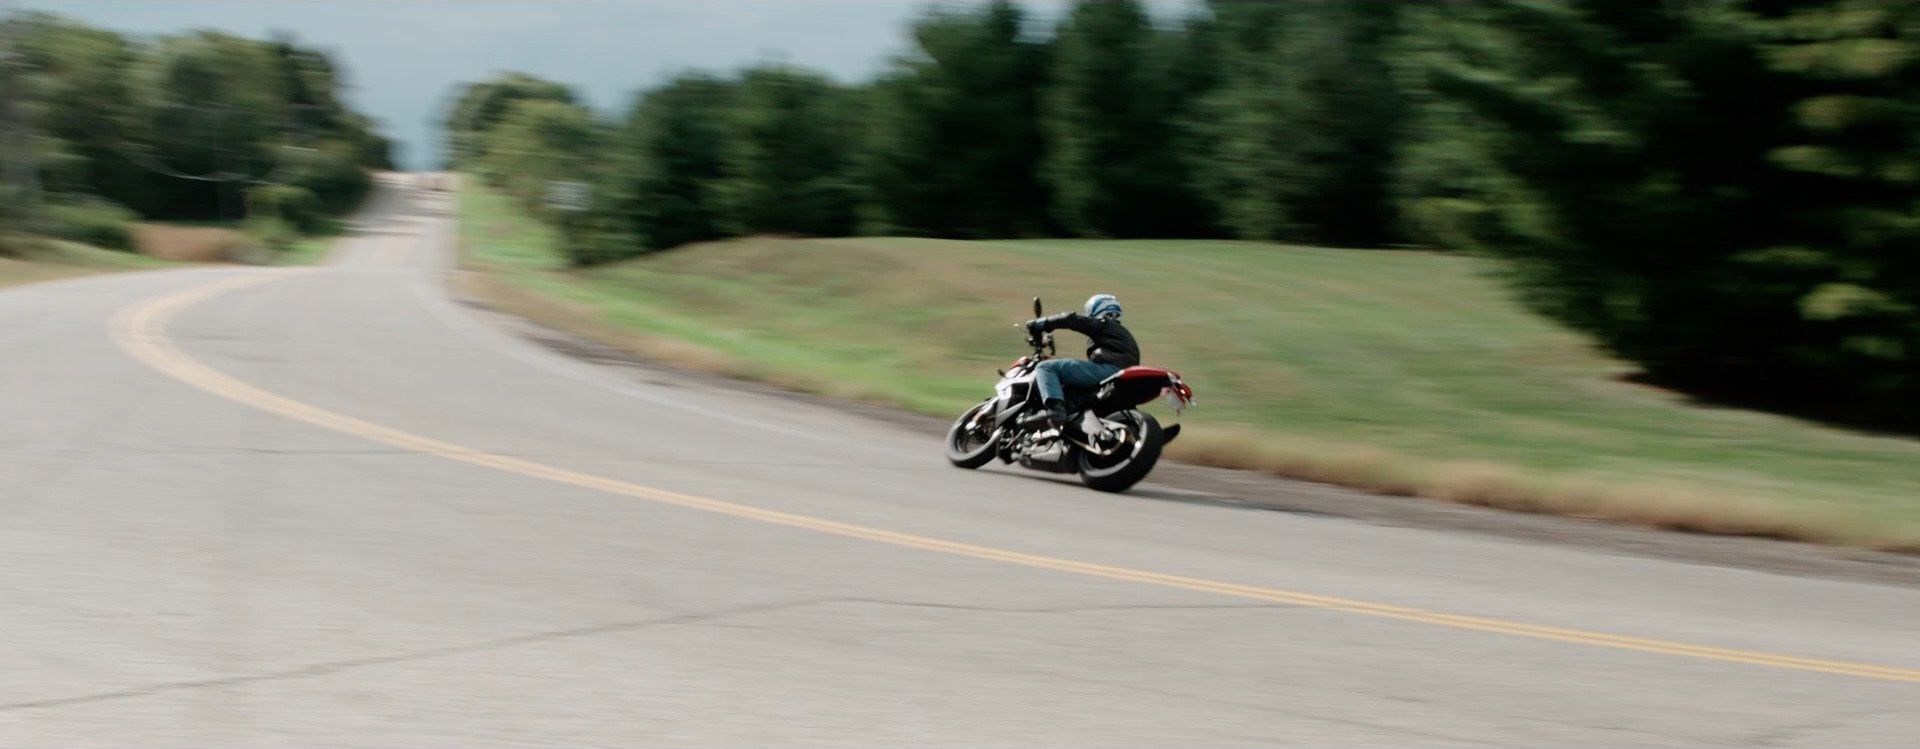 Erik Buell travelling at natural speeds with Eric Ristau for EatSleepRIDE